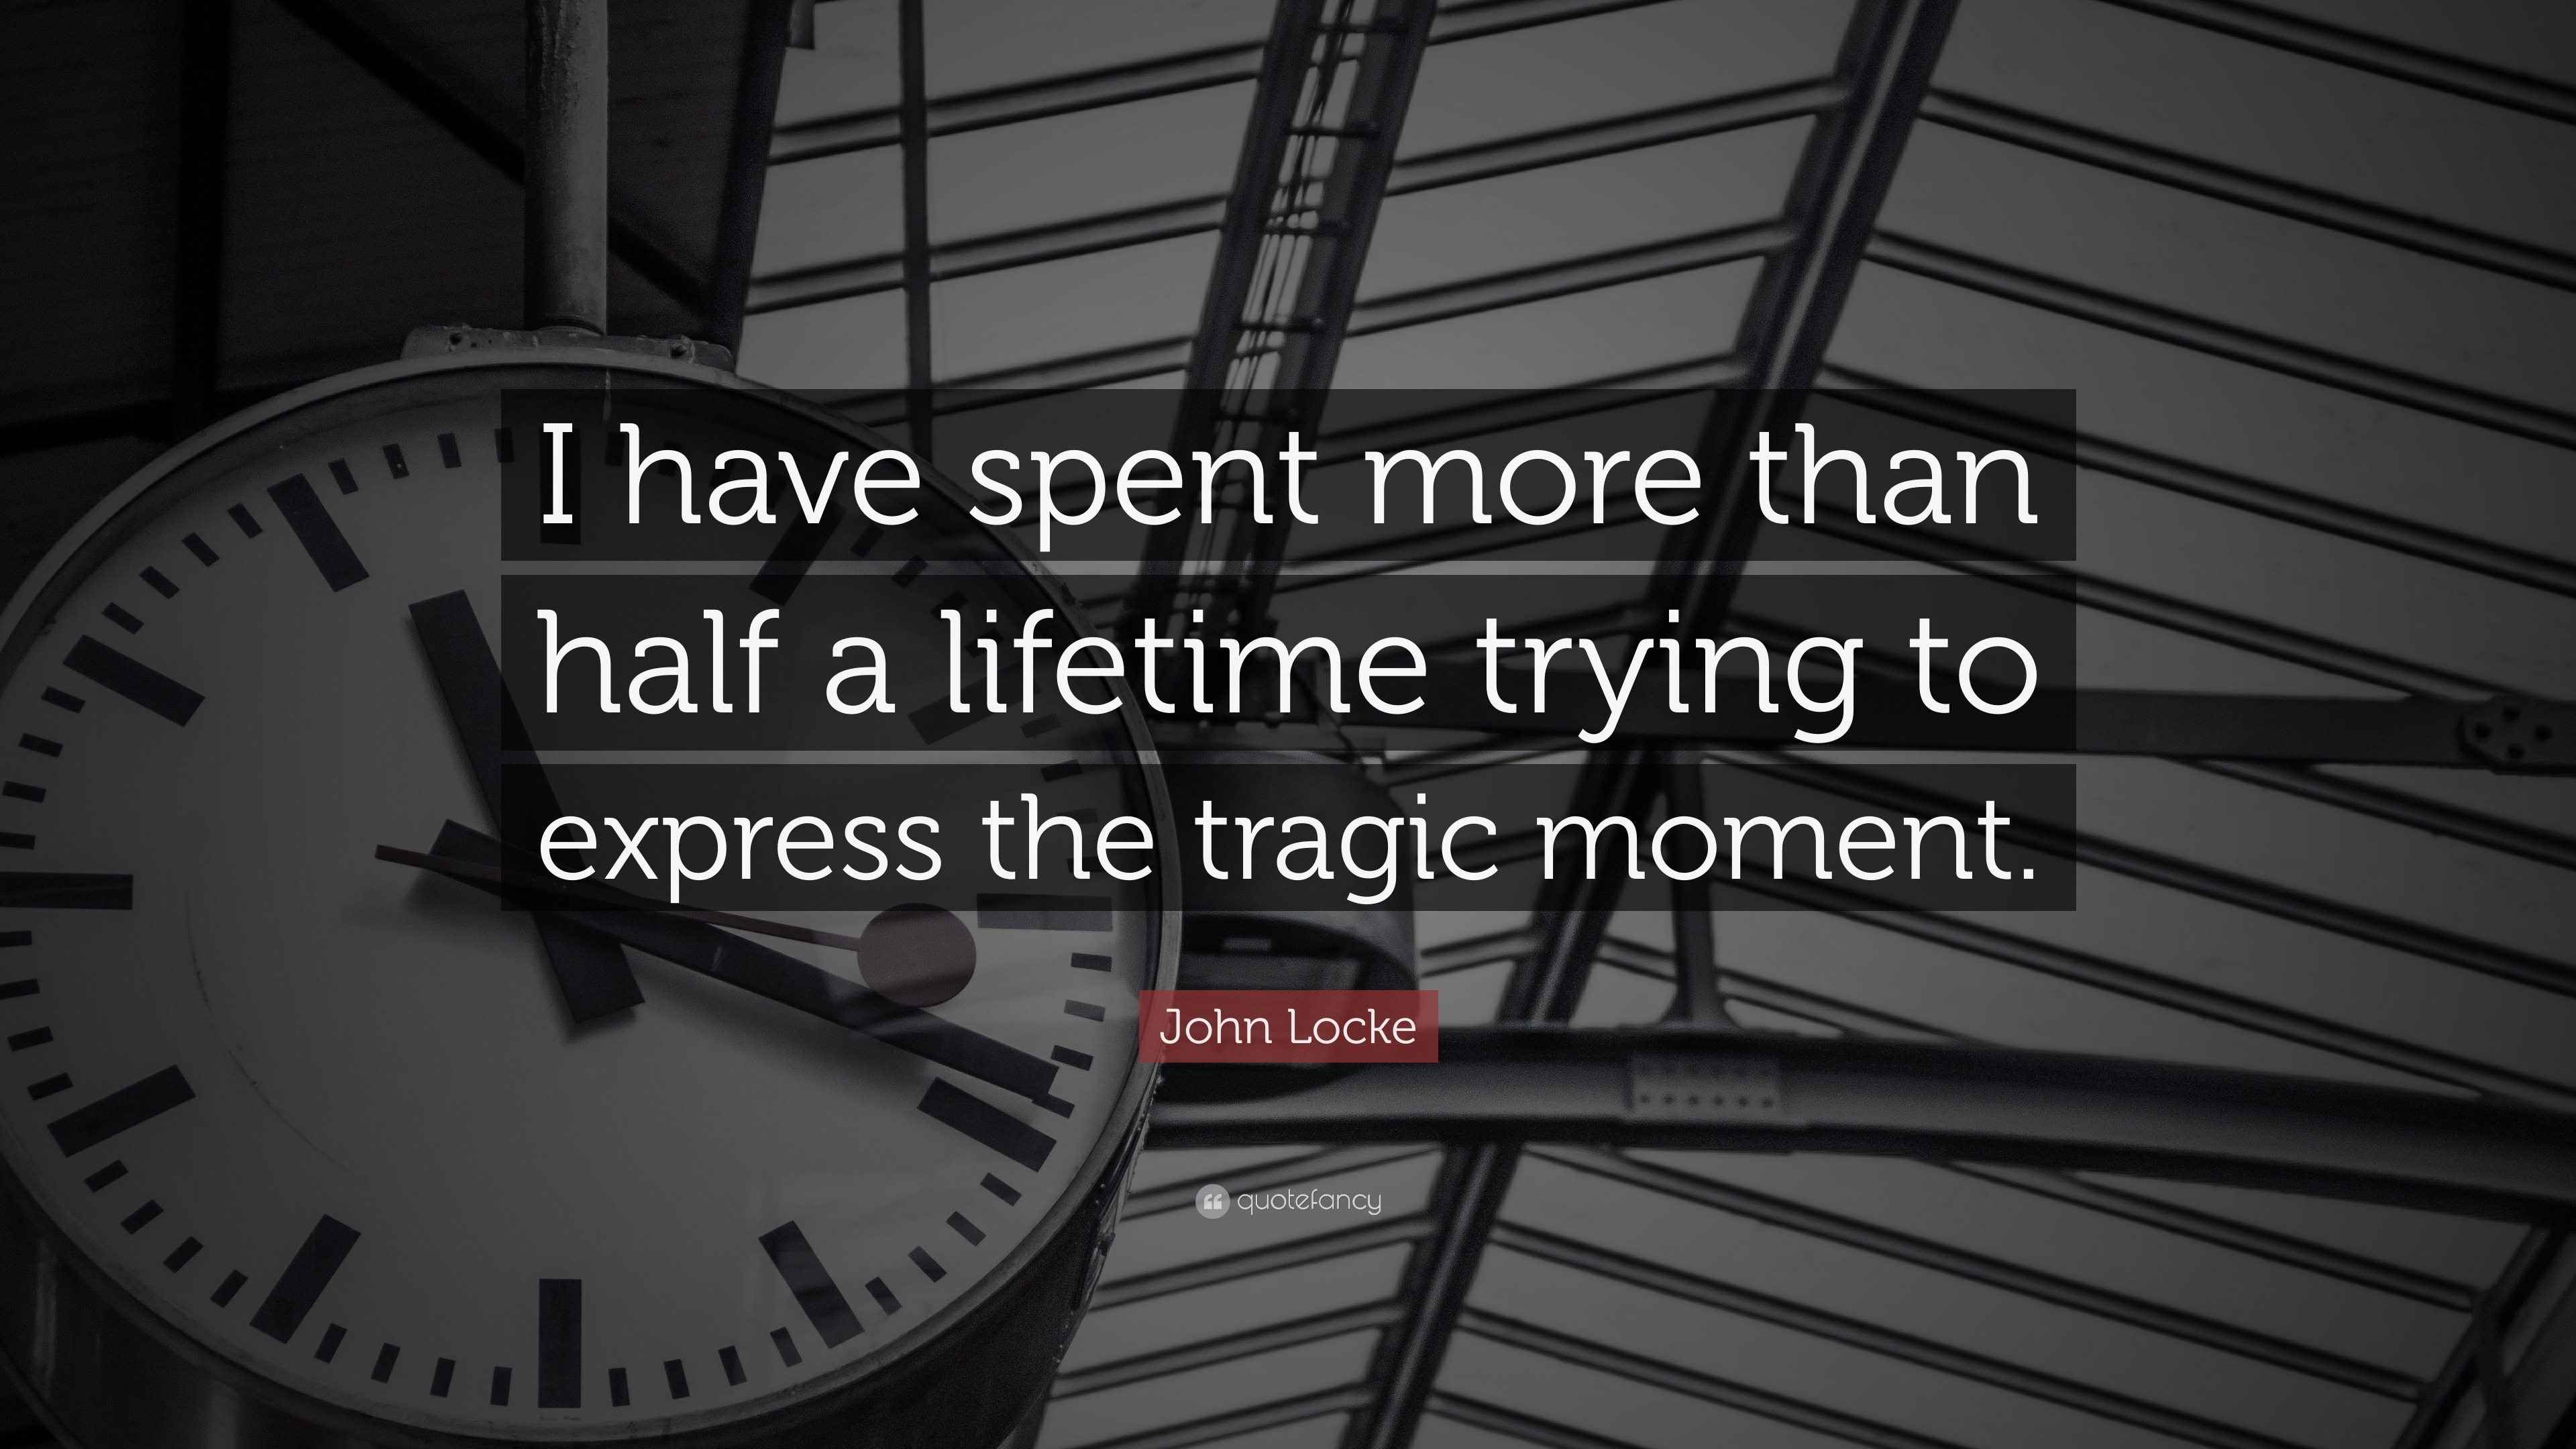 John Locke Quote: “I have spent more than half a lifetime trying to ...